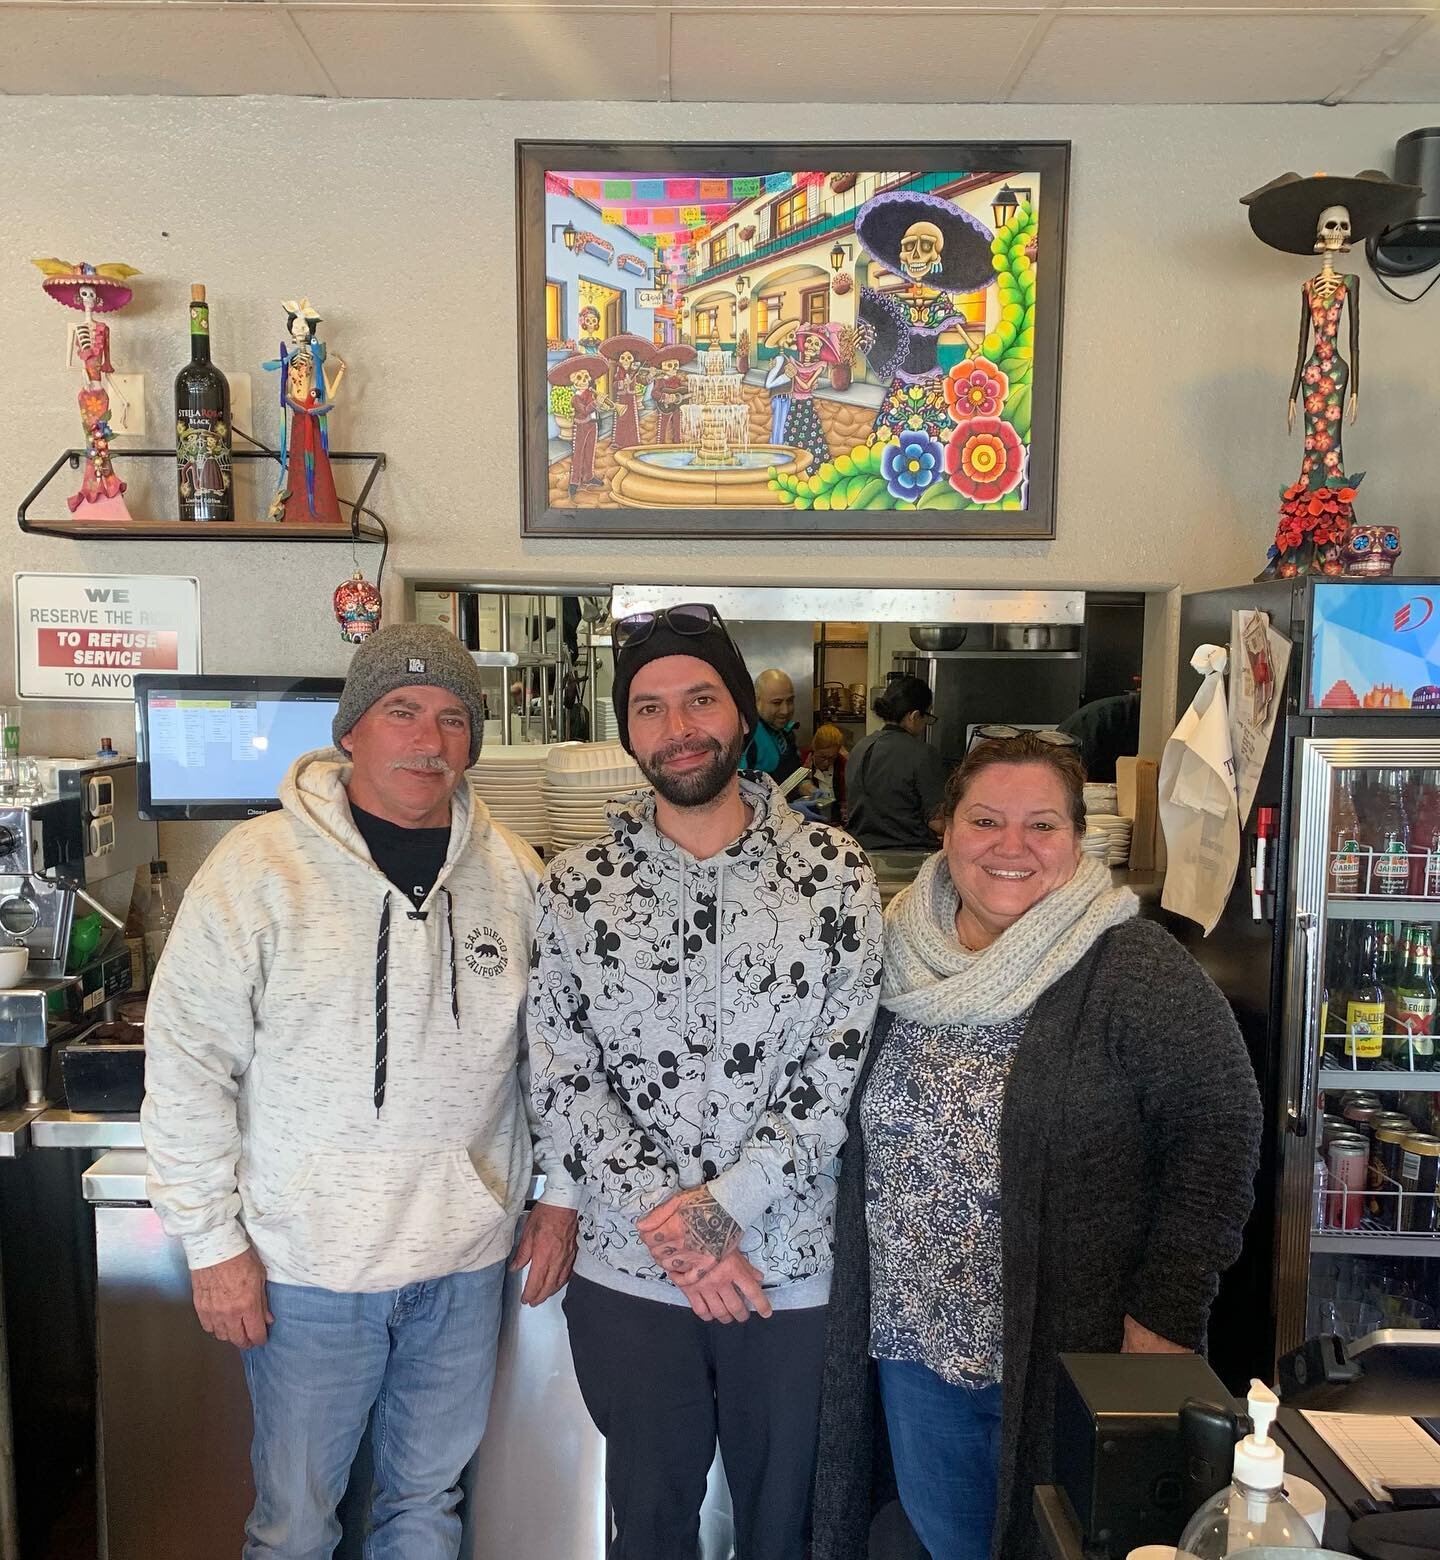 Had the pleasure of hosting artist Rafael Murillo @rafajm85 and his parents for the official unveiling of his signature painting made especially for Catrina Cafe. Stop by to view it, as well as his other amazing artwork displayed here at the cafe. 

